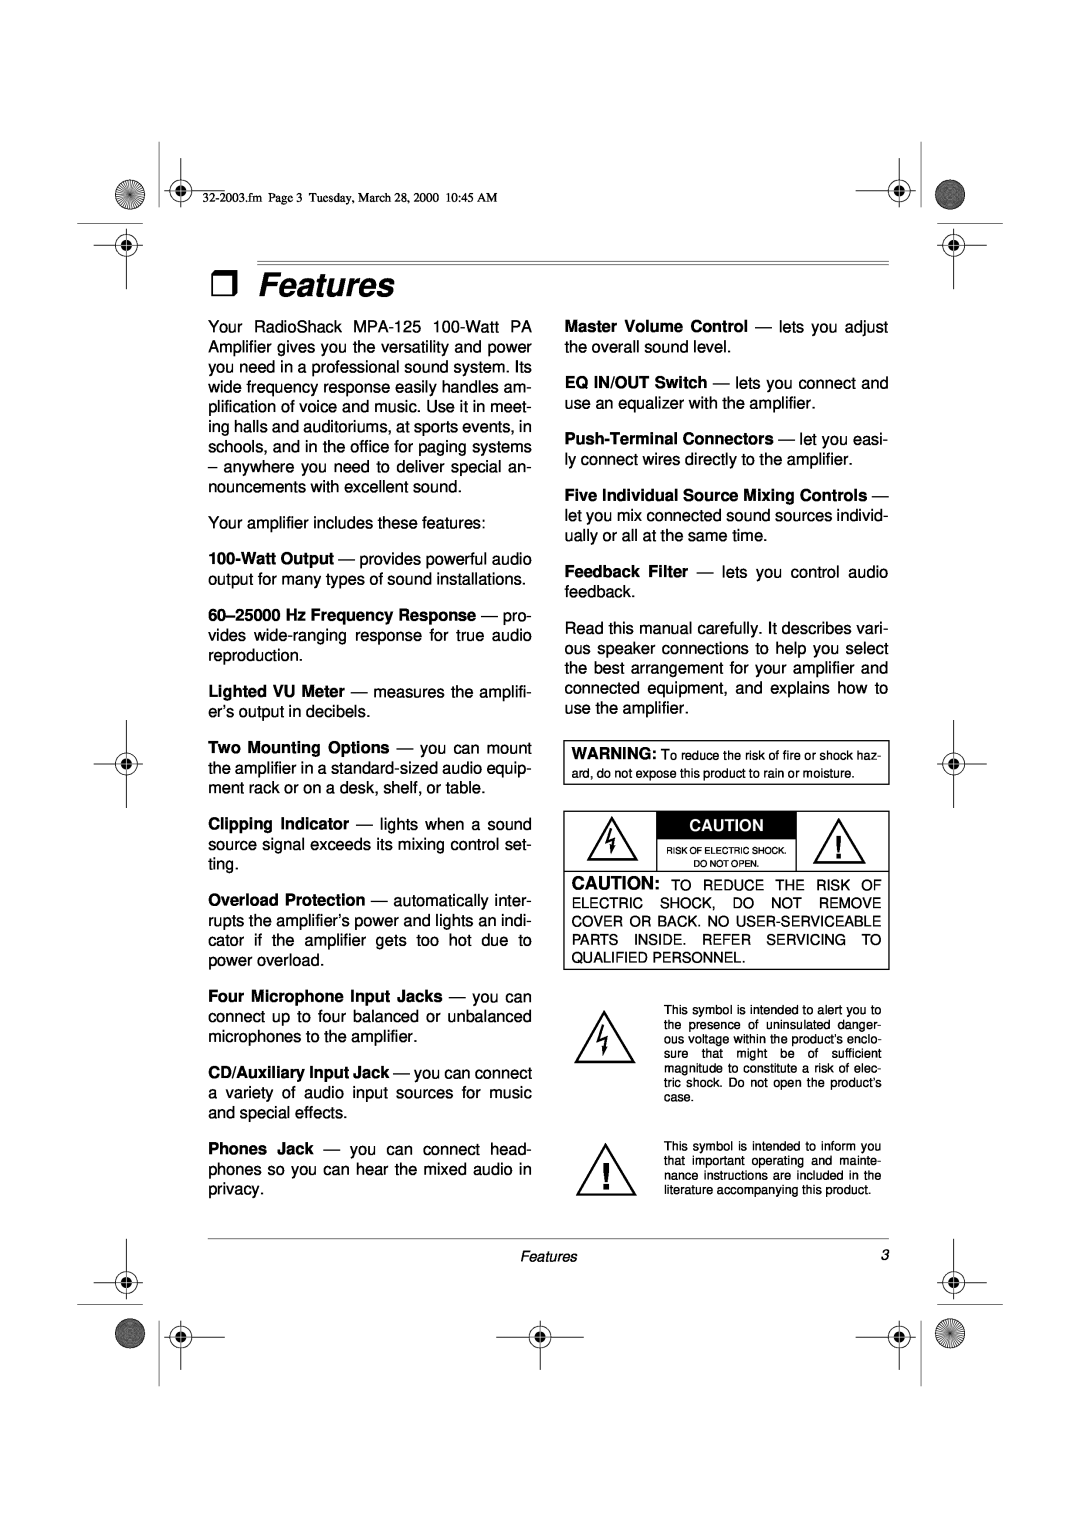 Radio Shack MPA-125 owner manual ˆFeatures 